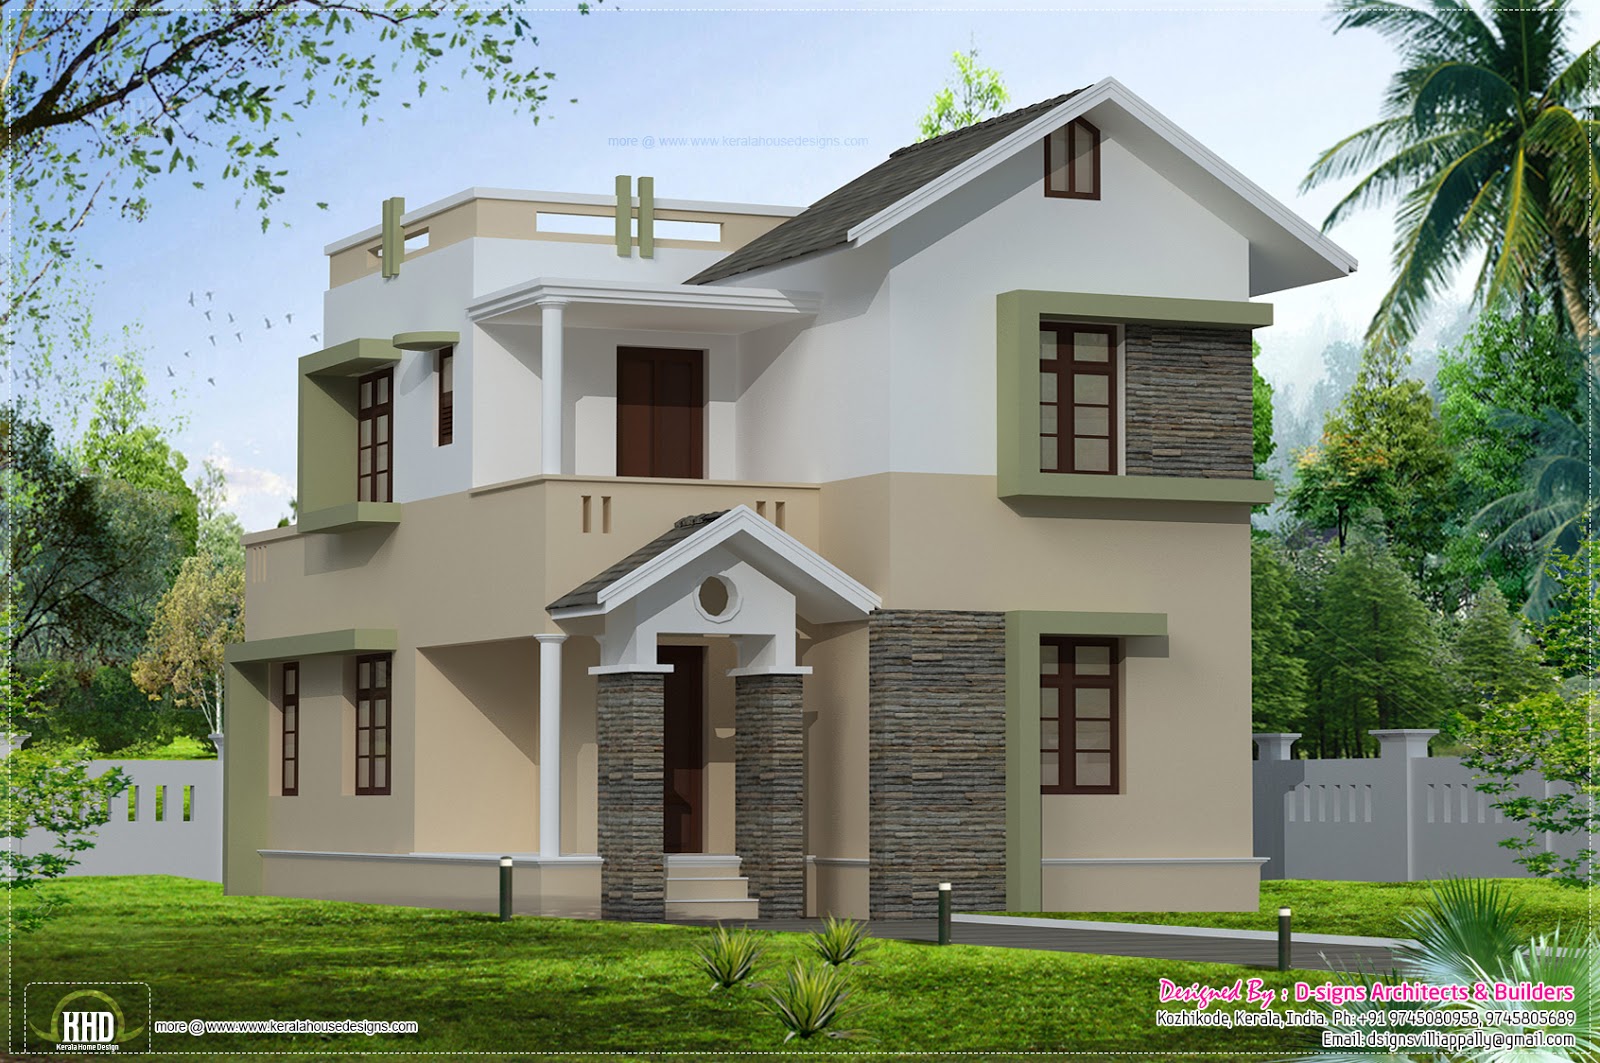 Front Elevation Of Small Houses Smart Home Designs